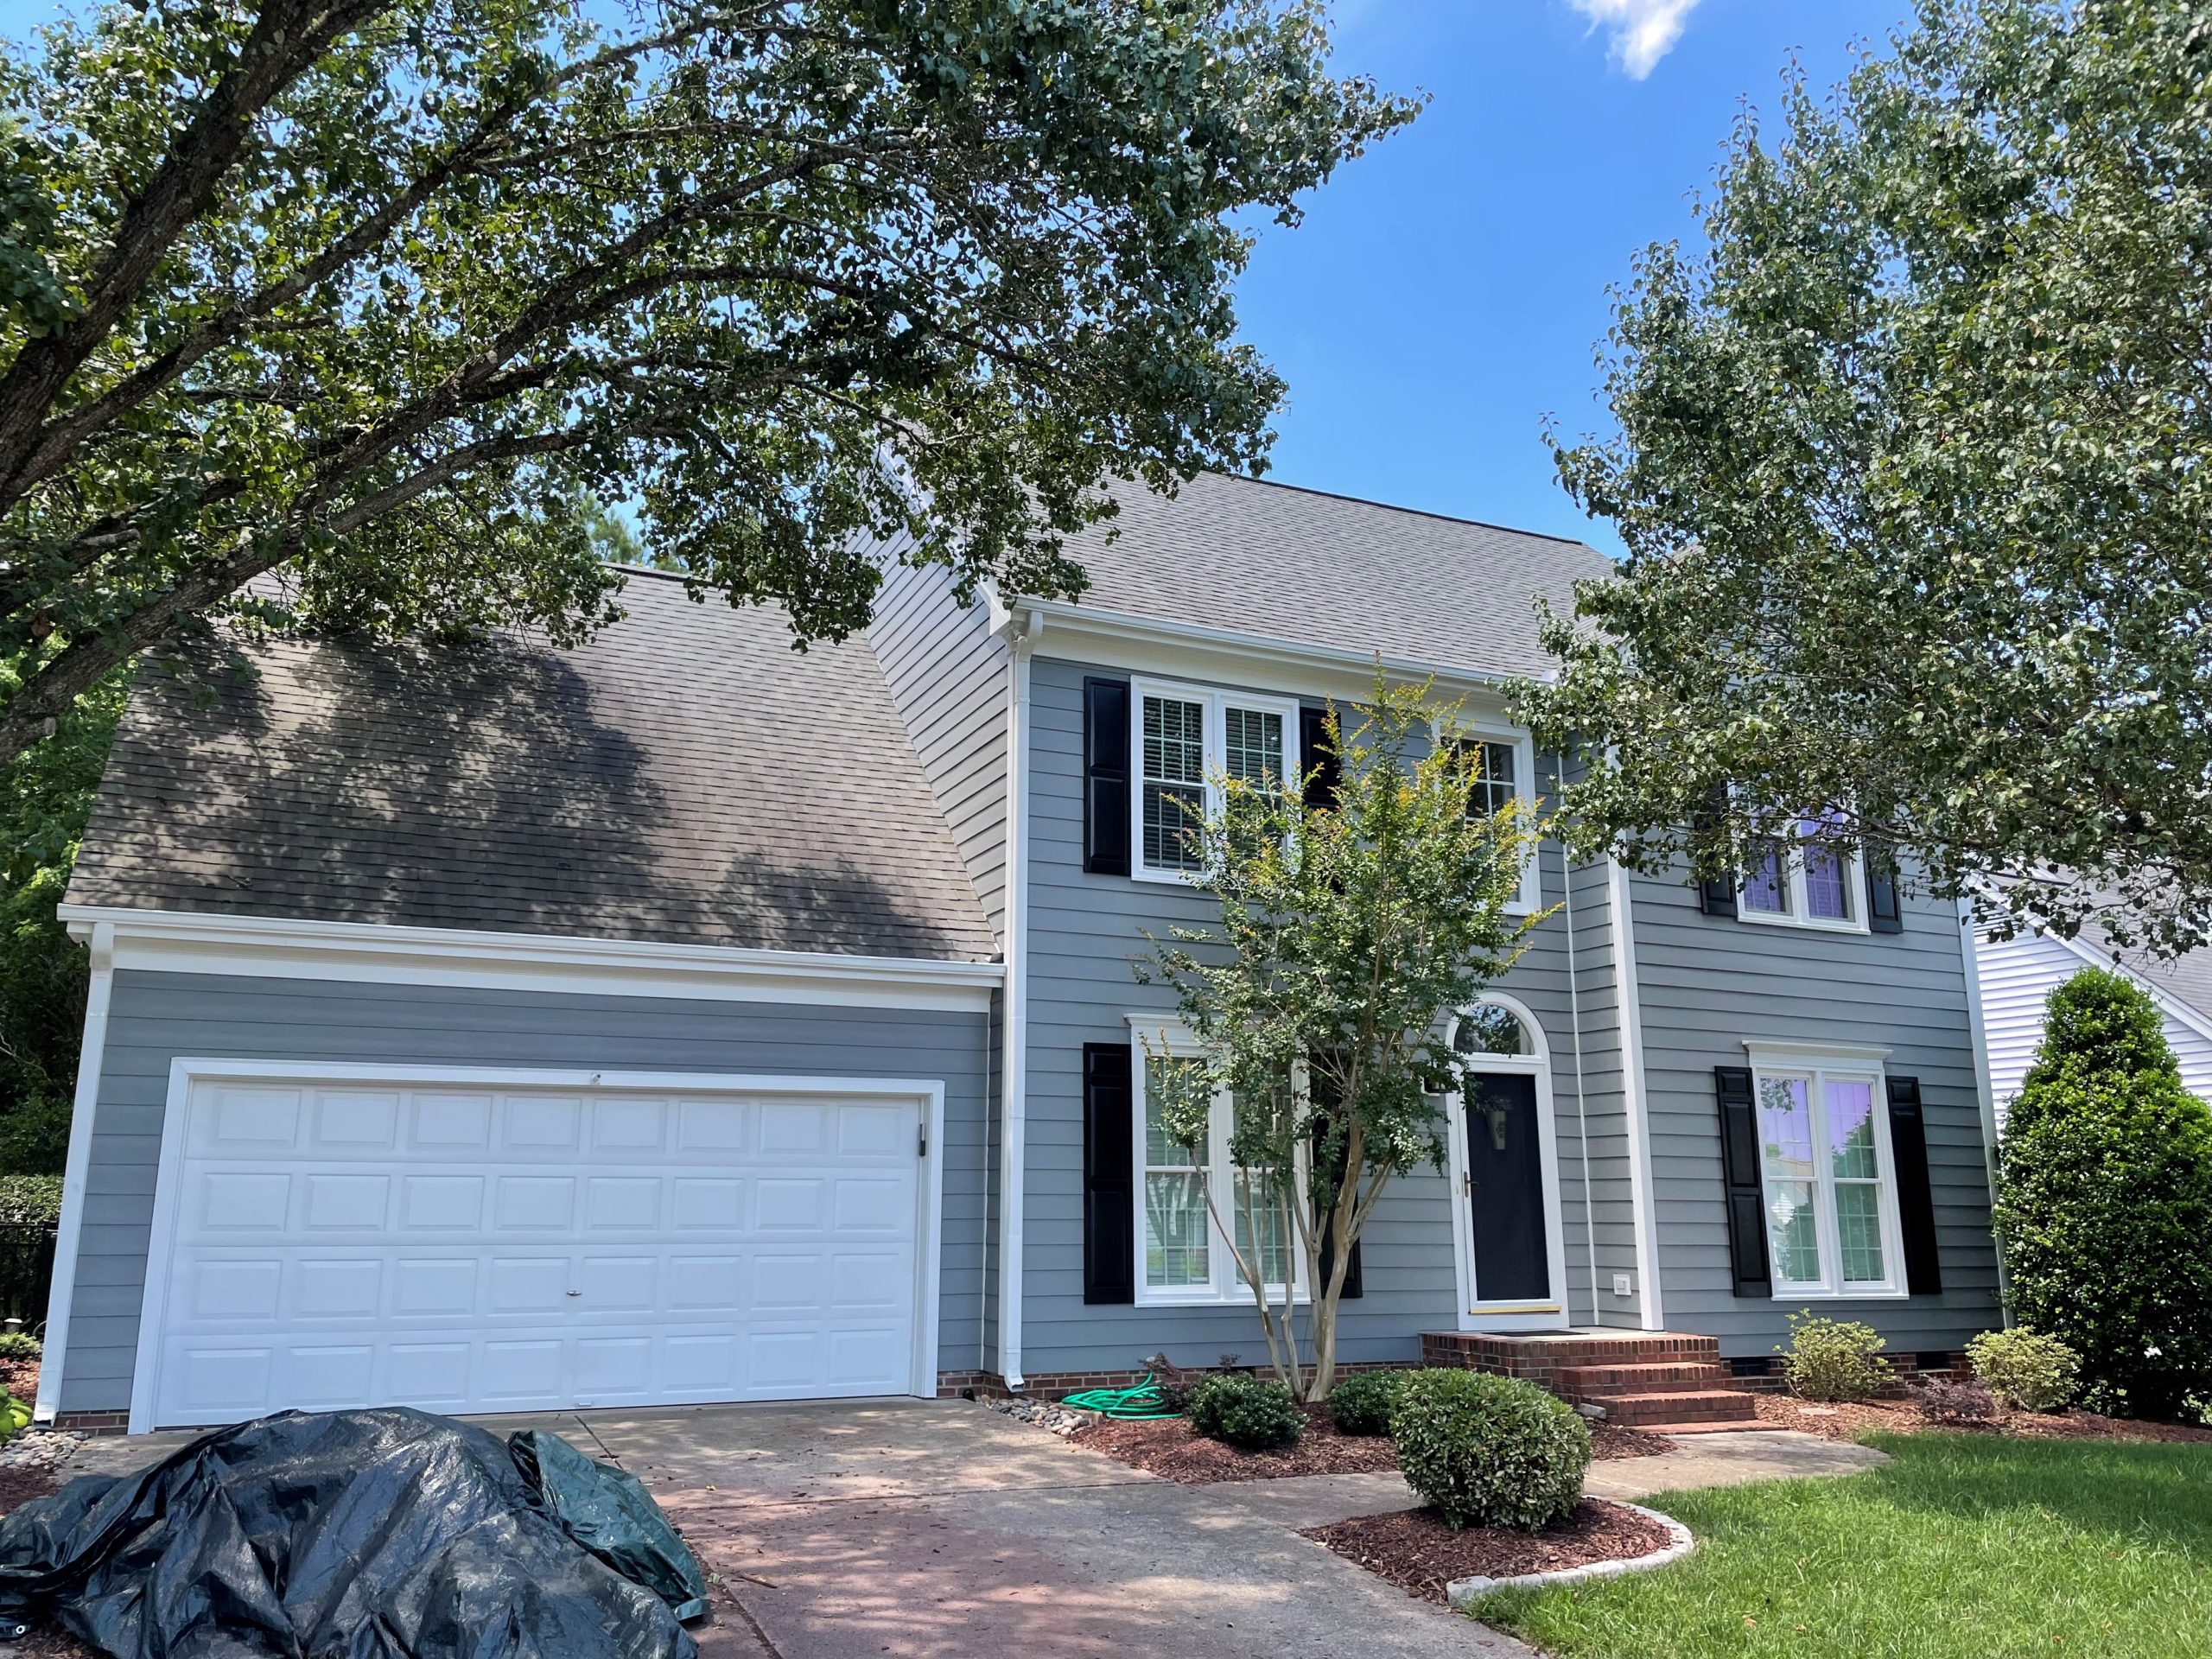 Billy J. – Cary, NC James Hardie Siding Replacement